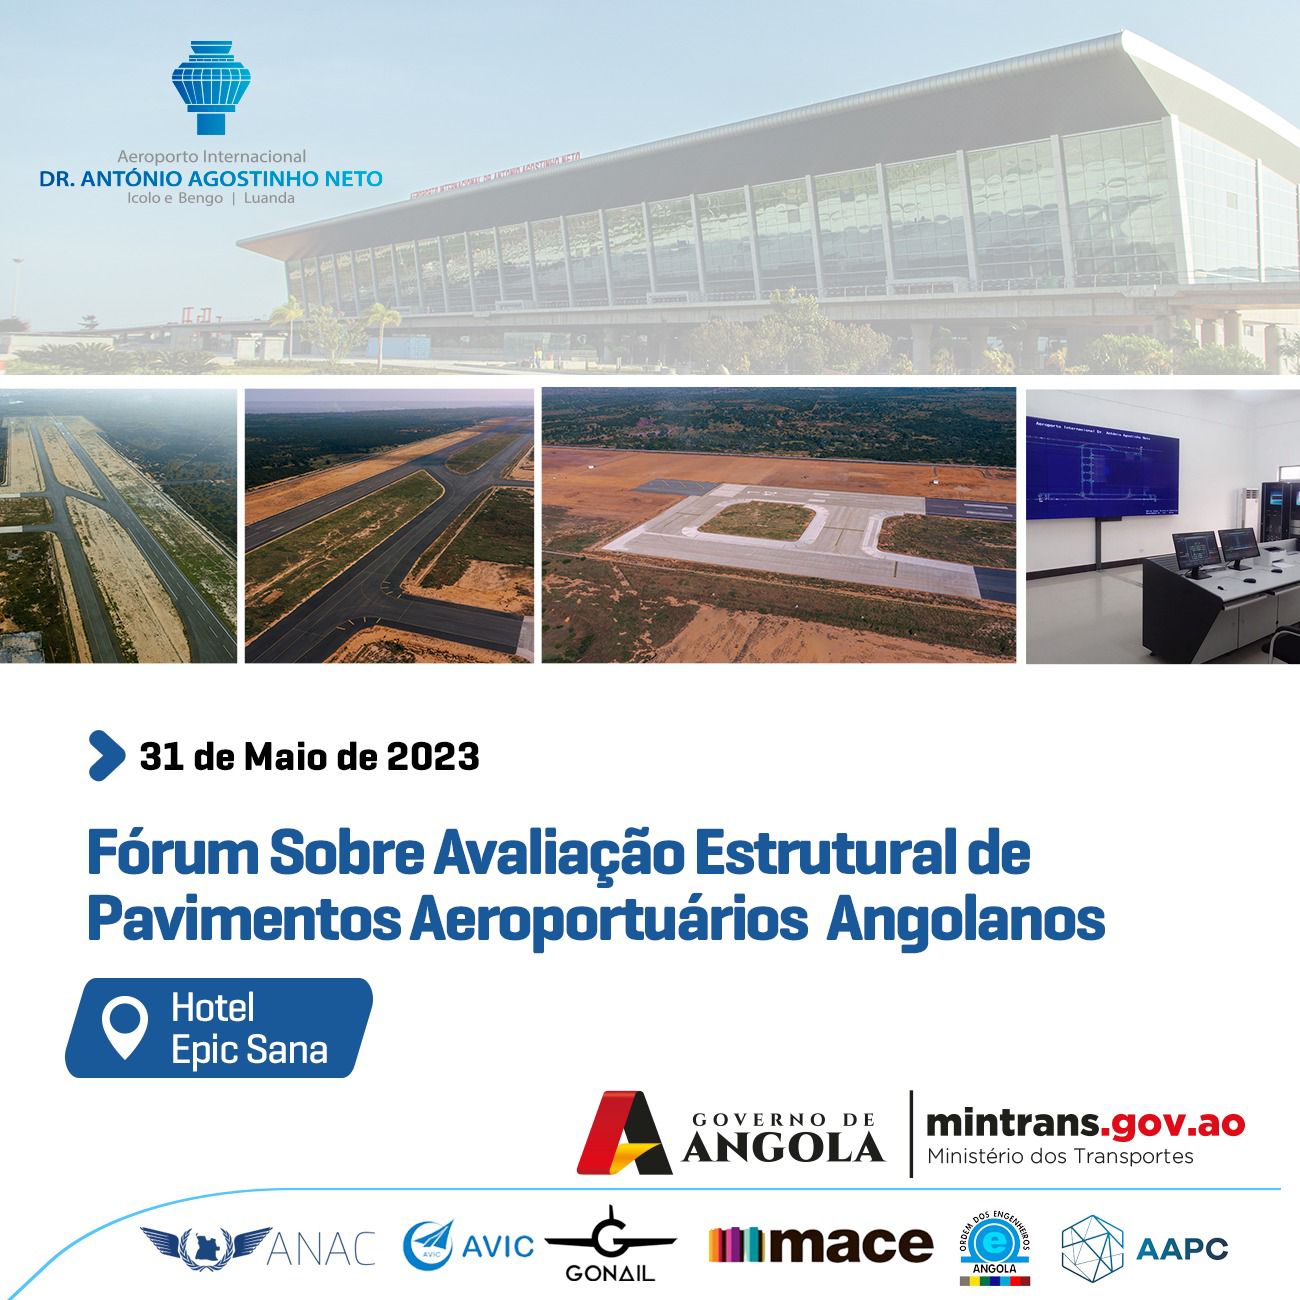 At Forum on Structural Assessment of Angolan Airport Pavements